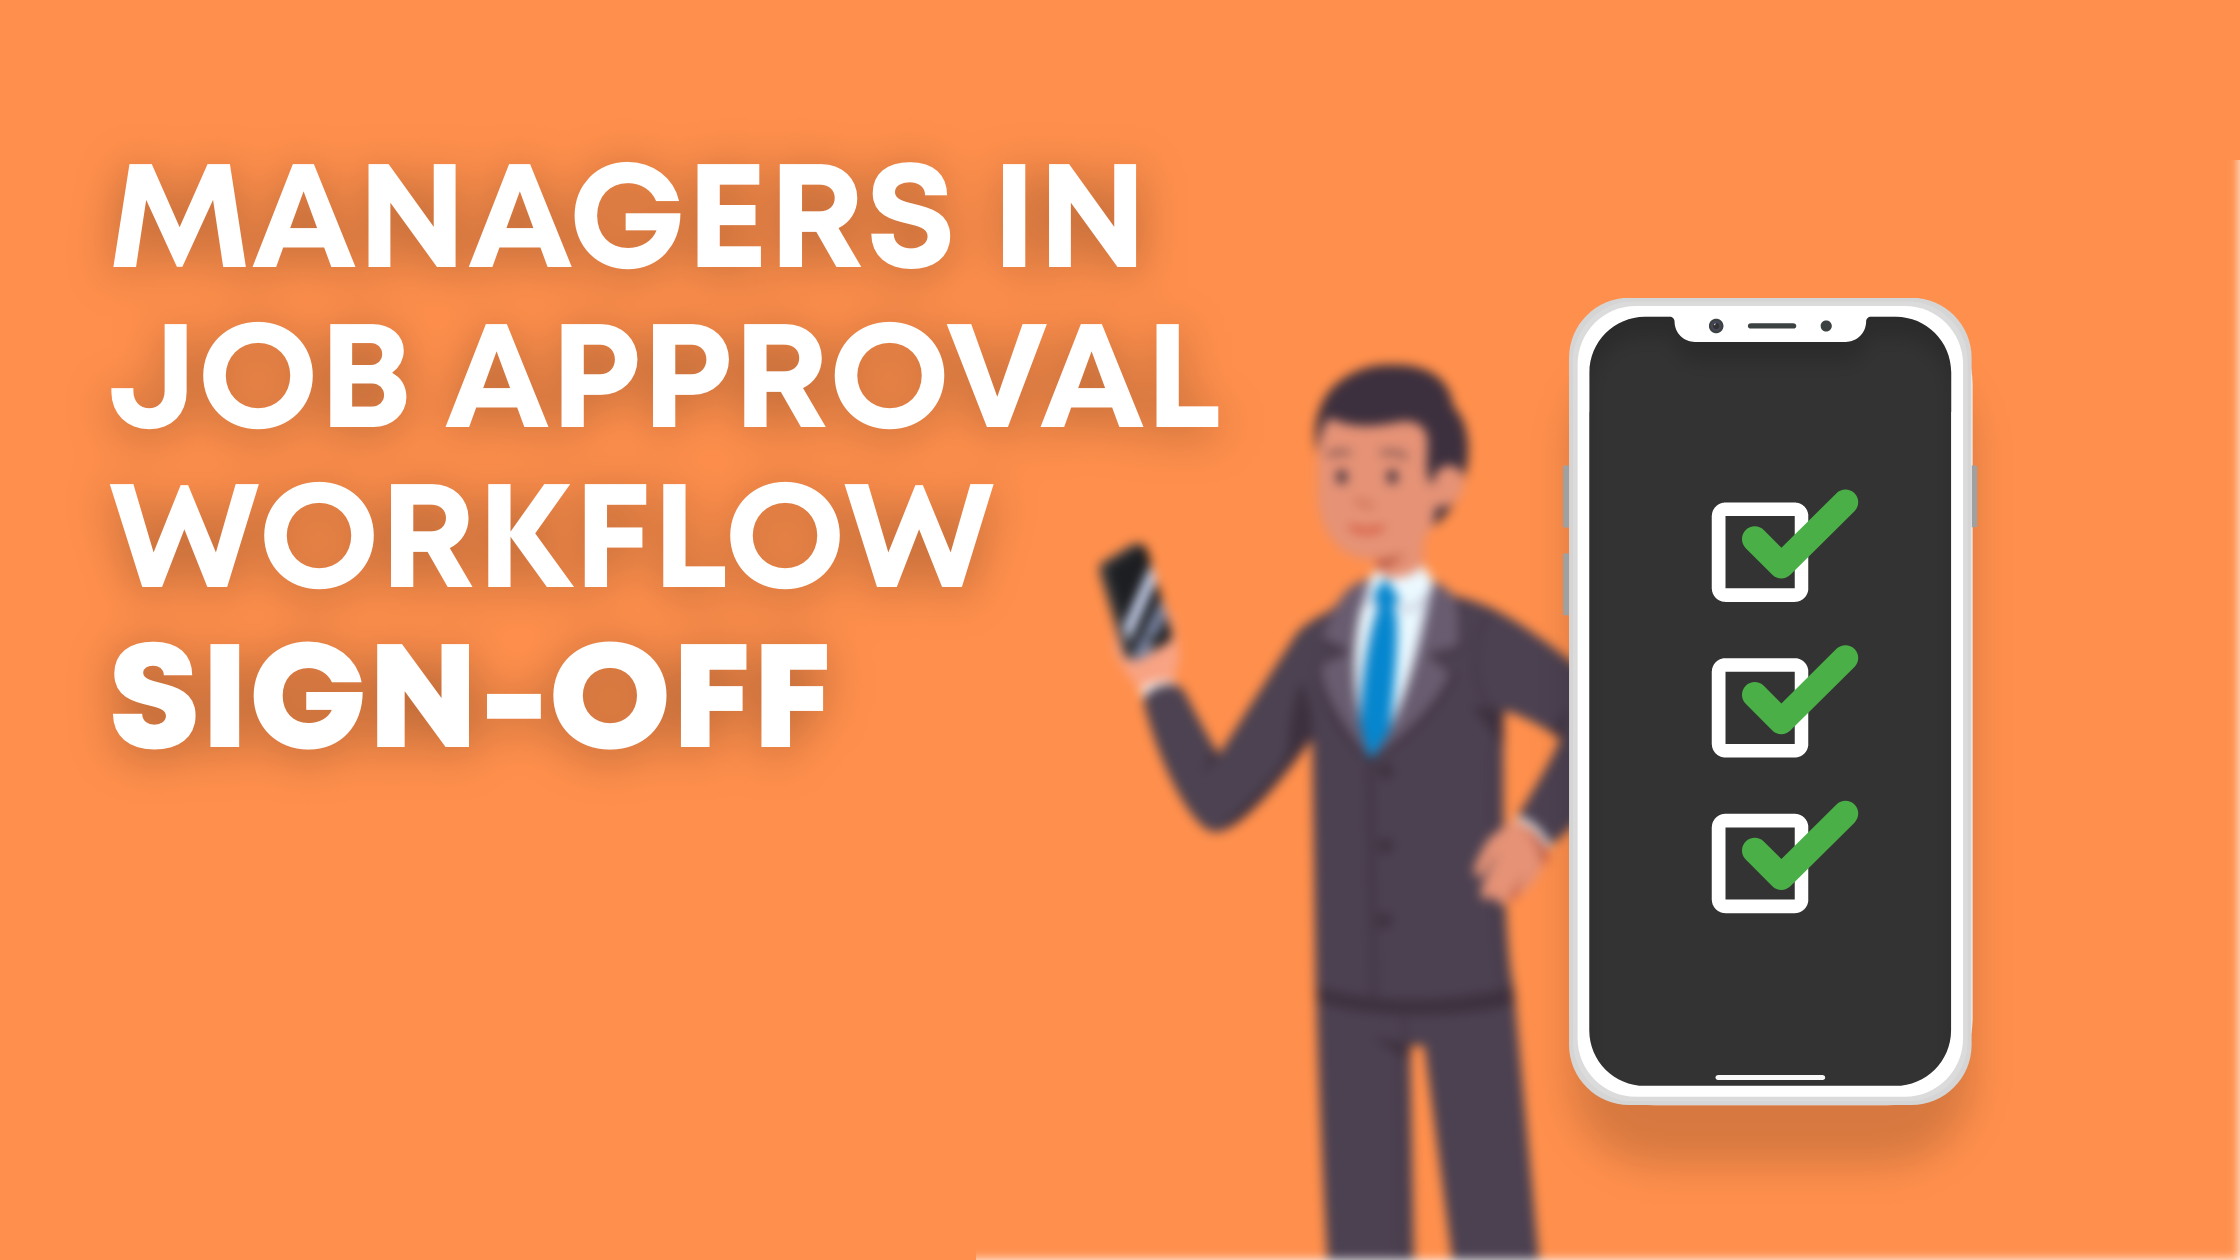 Managers-in-job-approval-workflow-sign-off